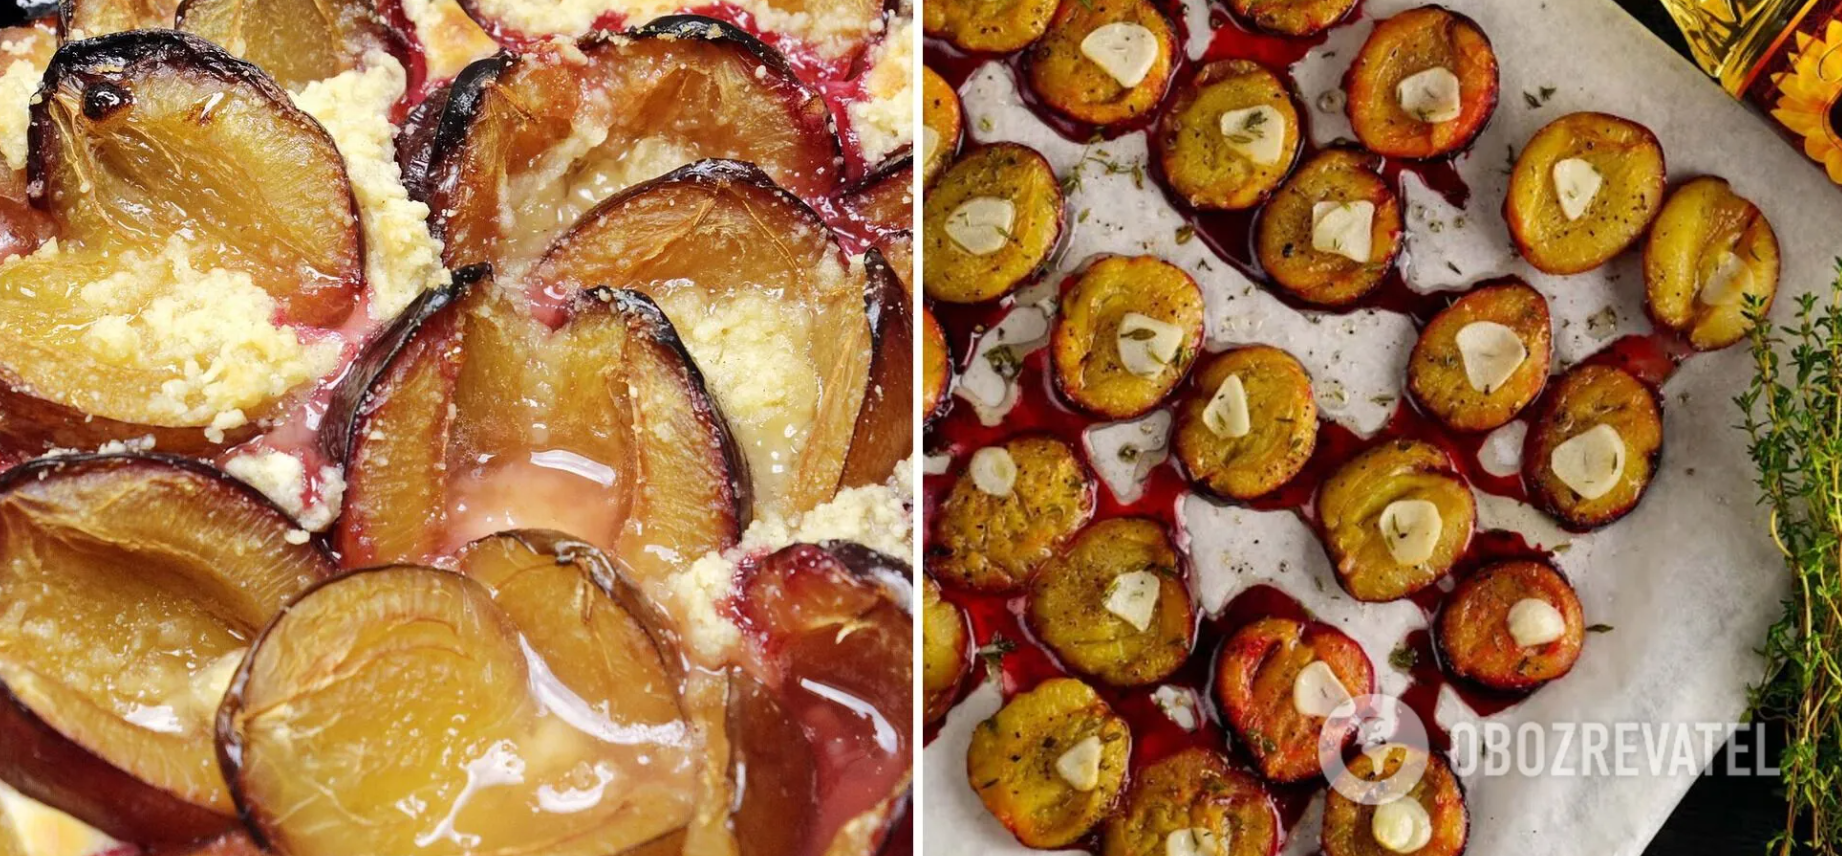 How to bake plums deliciously in the oven